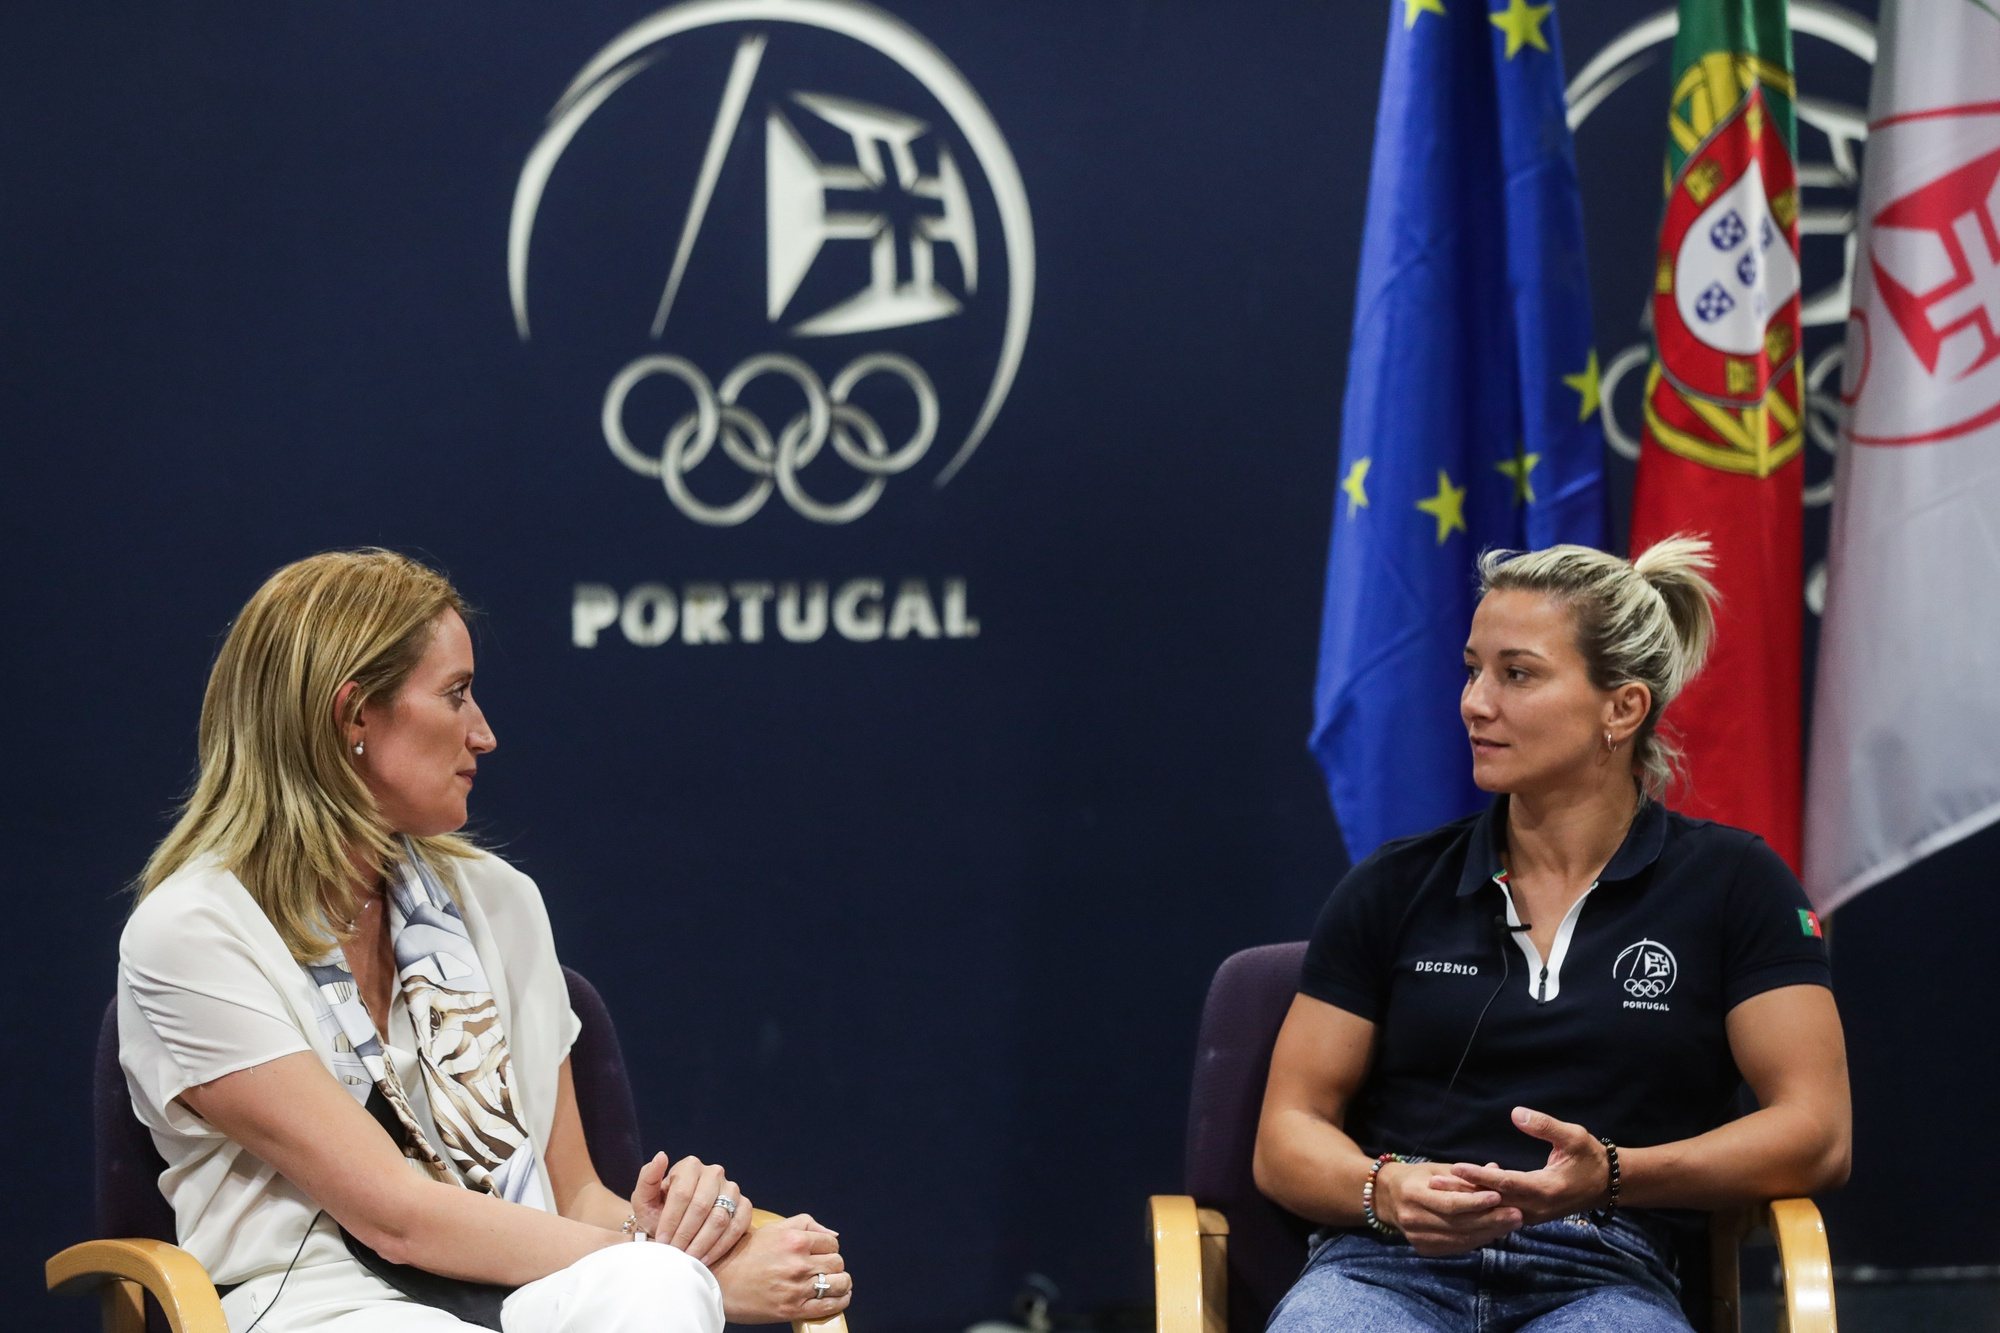 European Parliament President, Roberta Metsola (L), talking with Portuguese athlete Telma Monteiro during her visit to the Portuguese Olympic Committee headquarters in Lisbon, Portugal, 01st september 2022. TIAGO PETINGA/LUSA